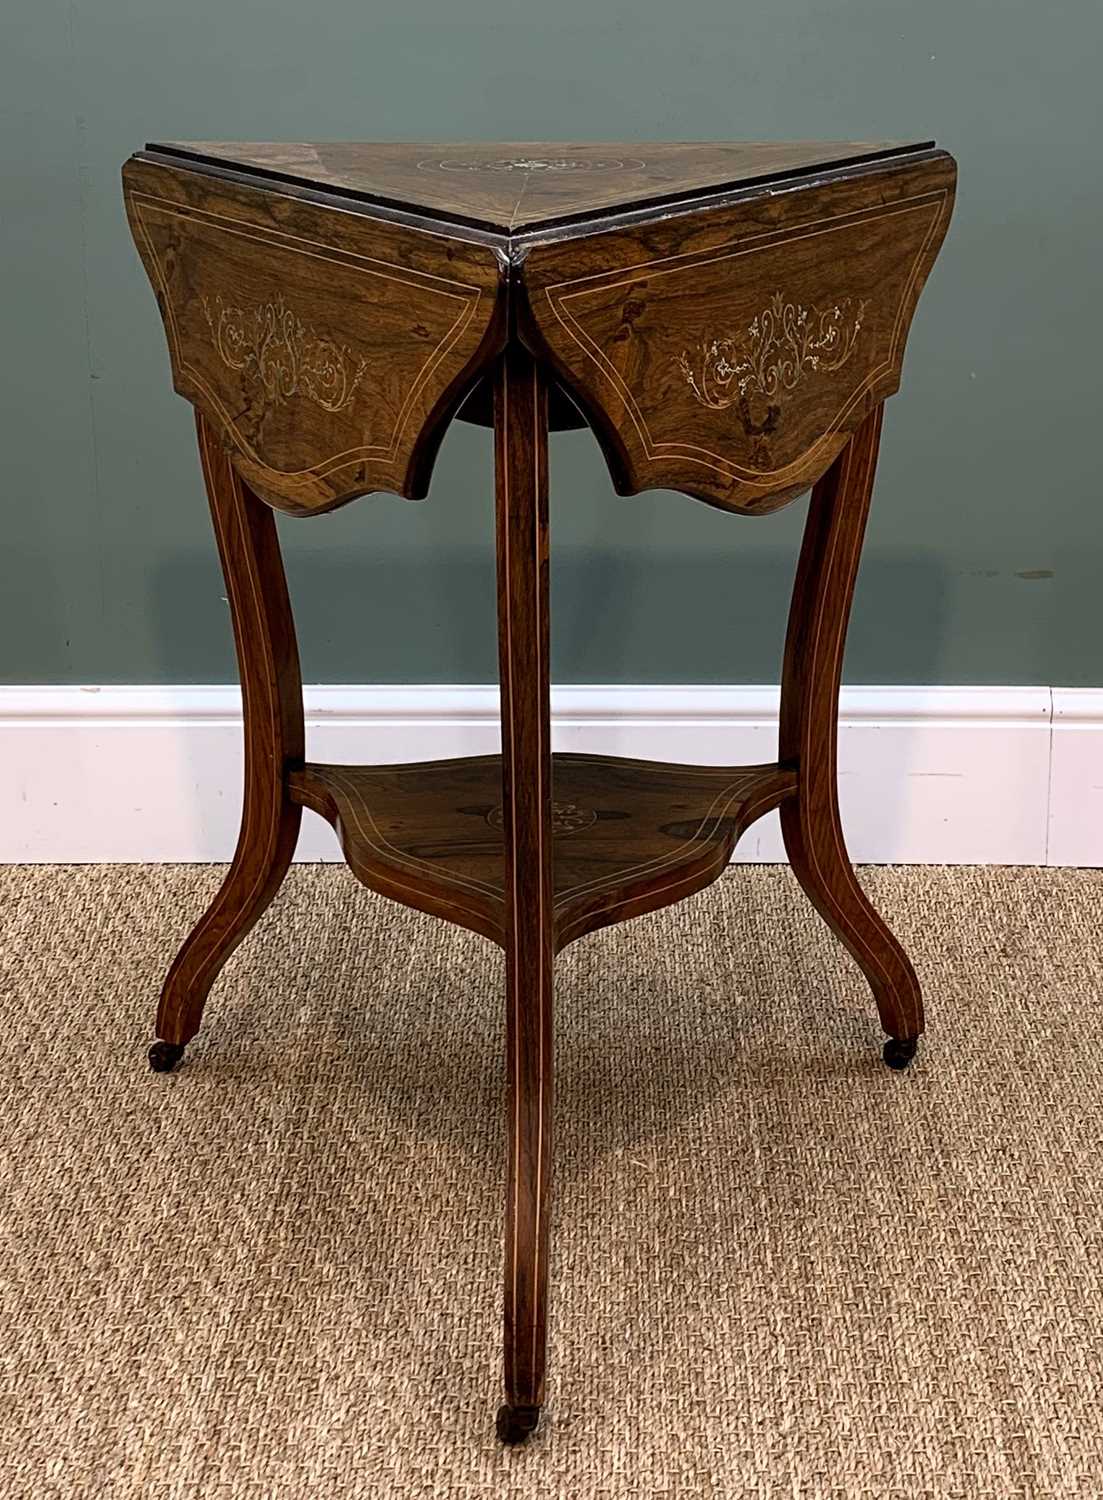 LATE 19TH CENTURY ROSEWOOD TRIANGULAR OCCASIONAL TABLE, shaped drop-flap top with boxwood stringing, - Image 5 of 7